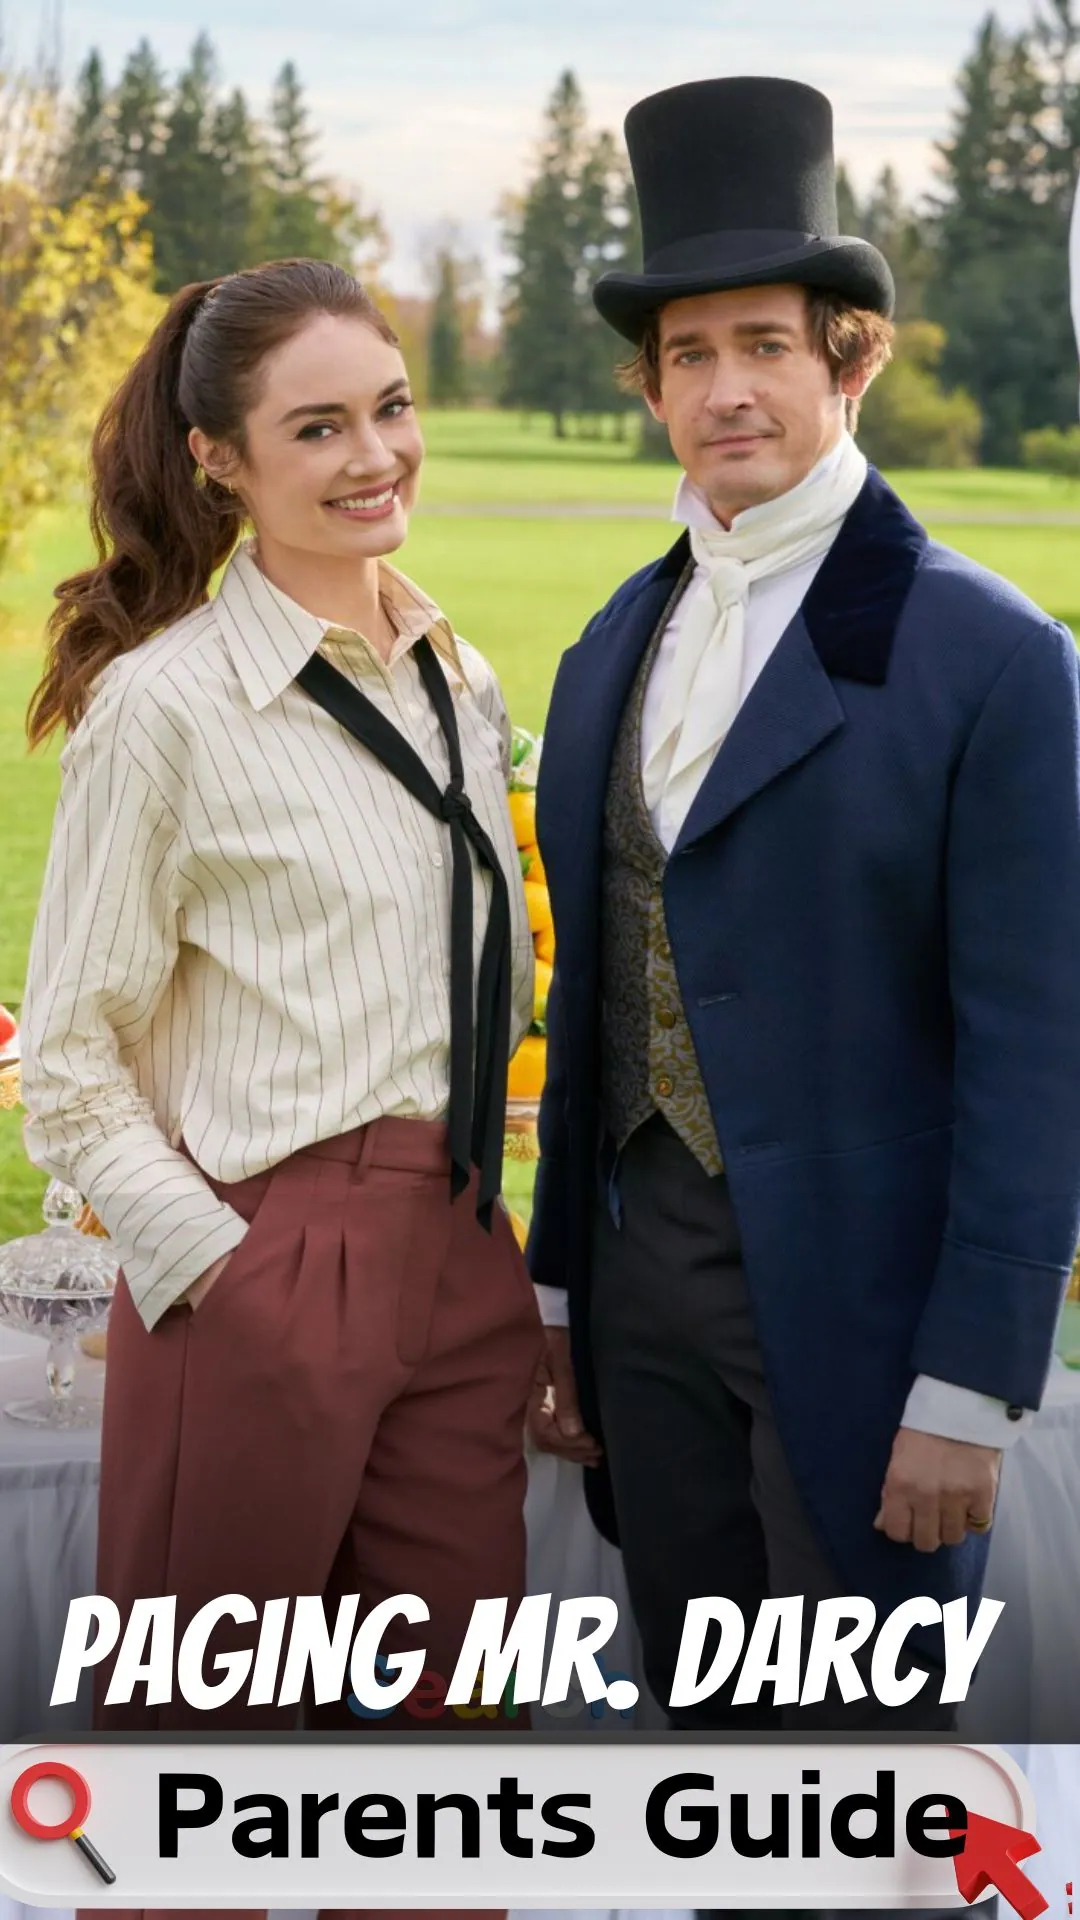 Paging Mr. Darcy Parents Guide (1)